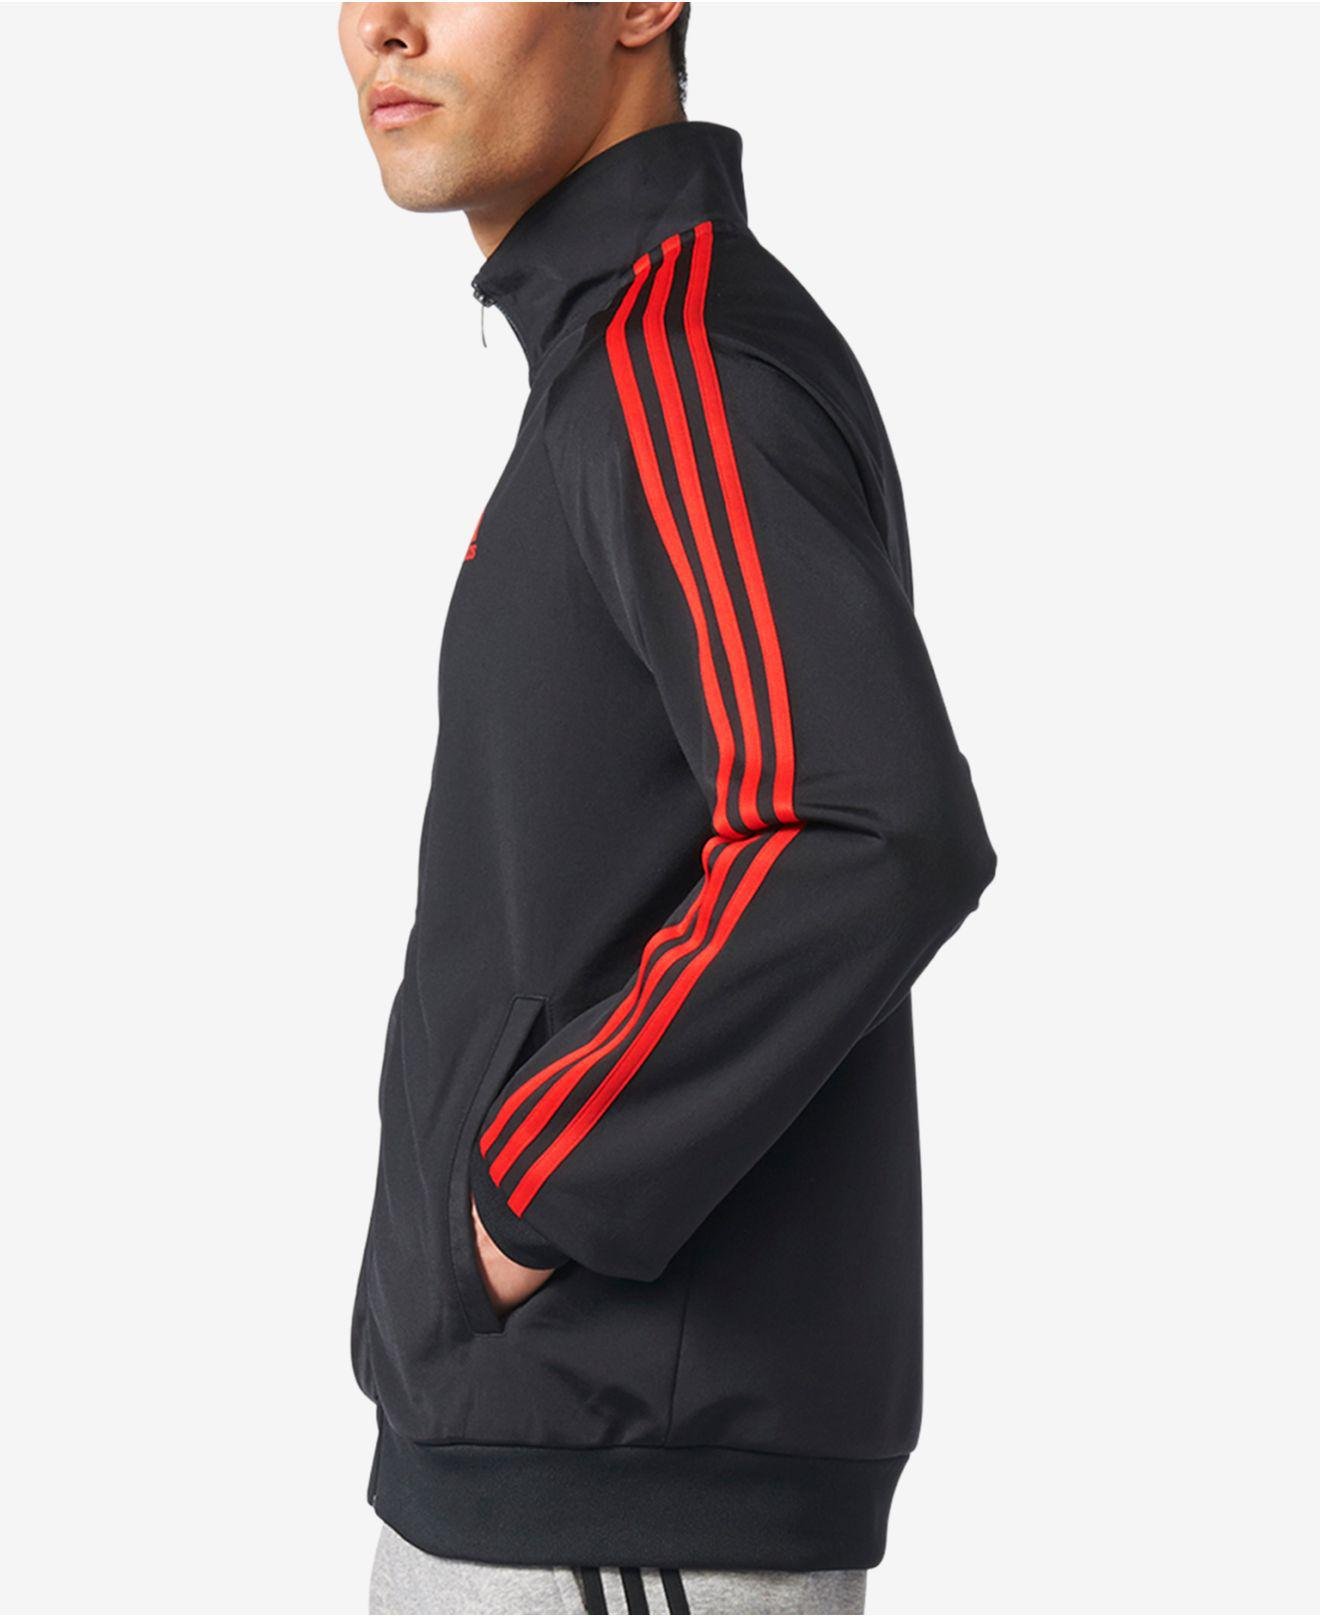 adidas Synthetic Men's Three-stripe Warm-up Jacket in Black/Red (Black